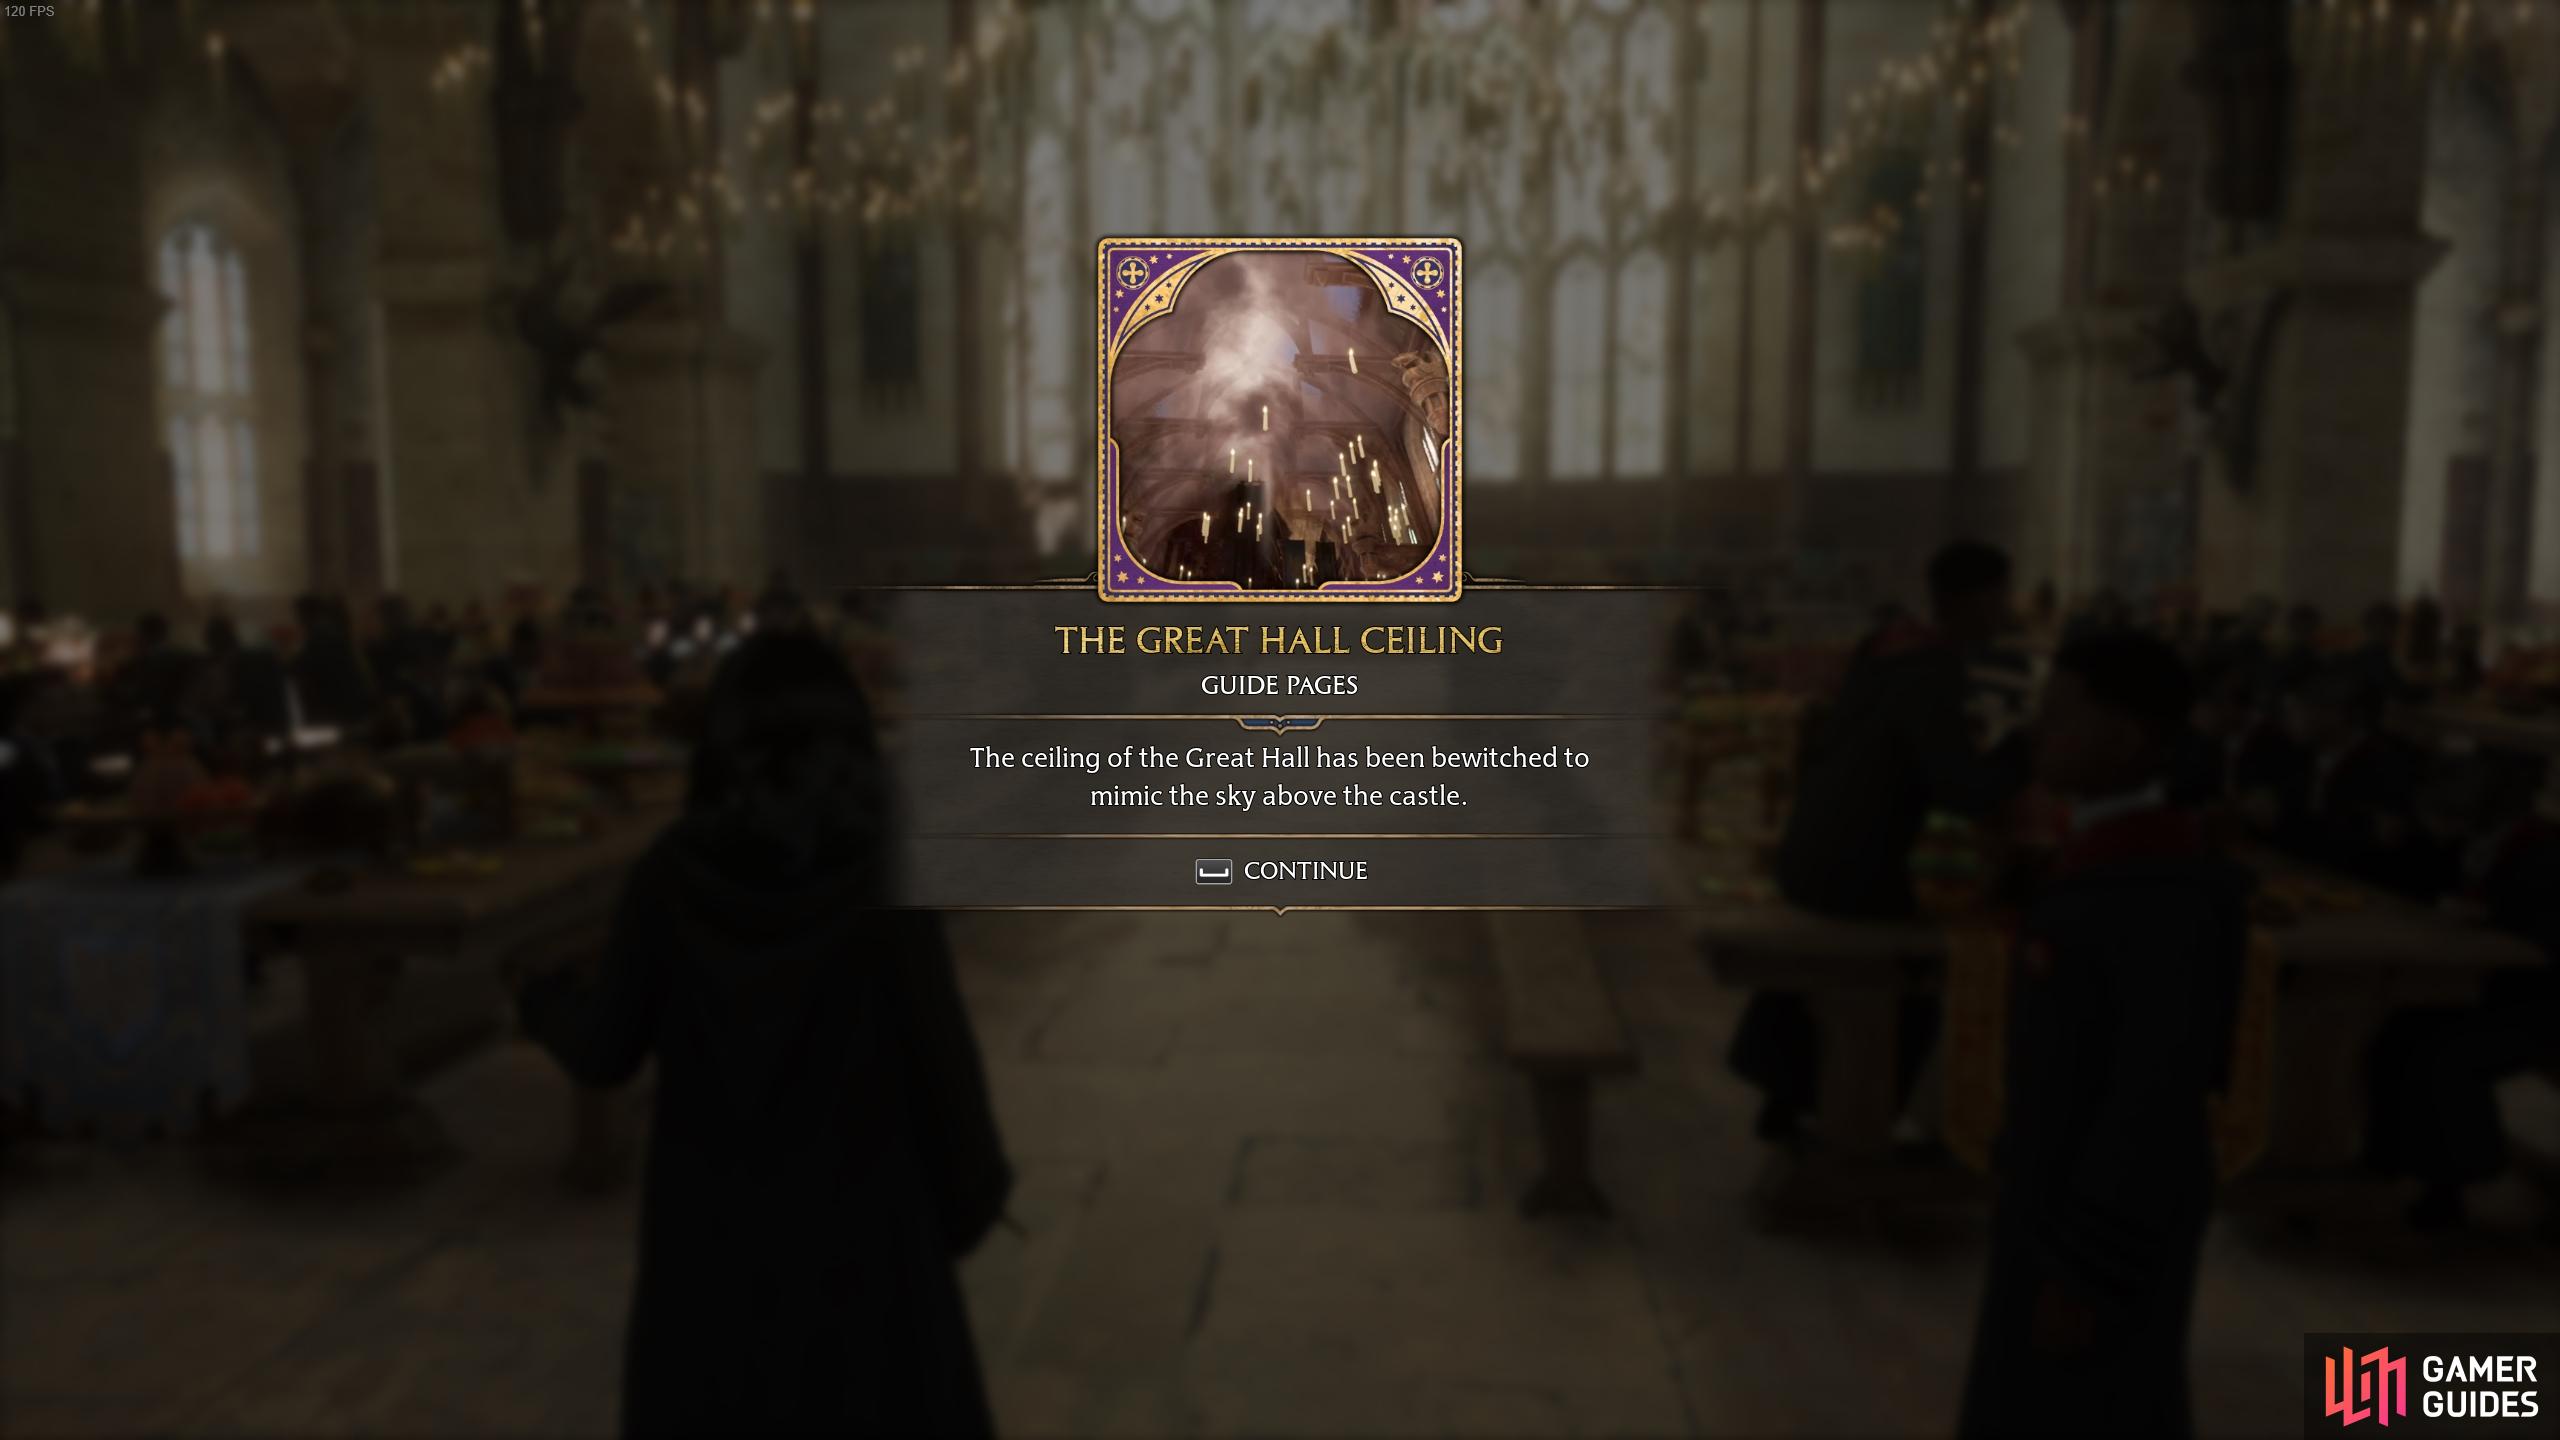 The description for The Great Hall Ceiling page.